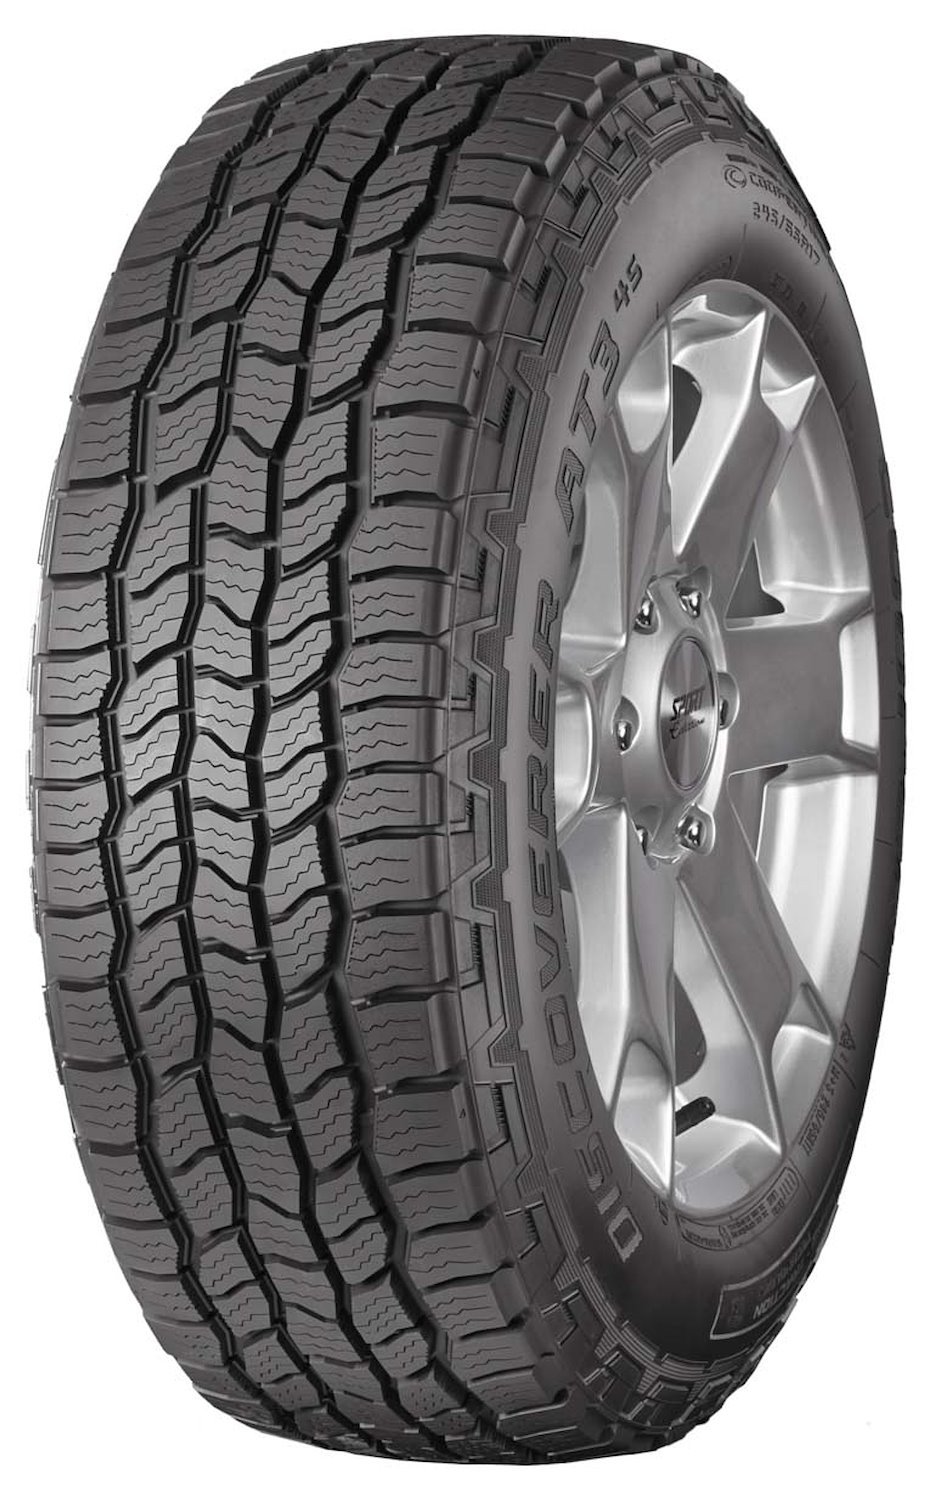 Discoverer AT3 4S All-Terrain Tire, 265/60R18